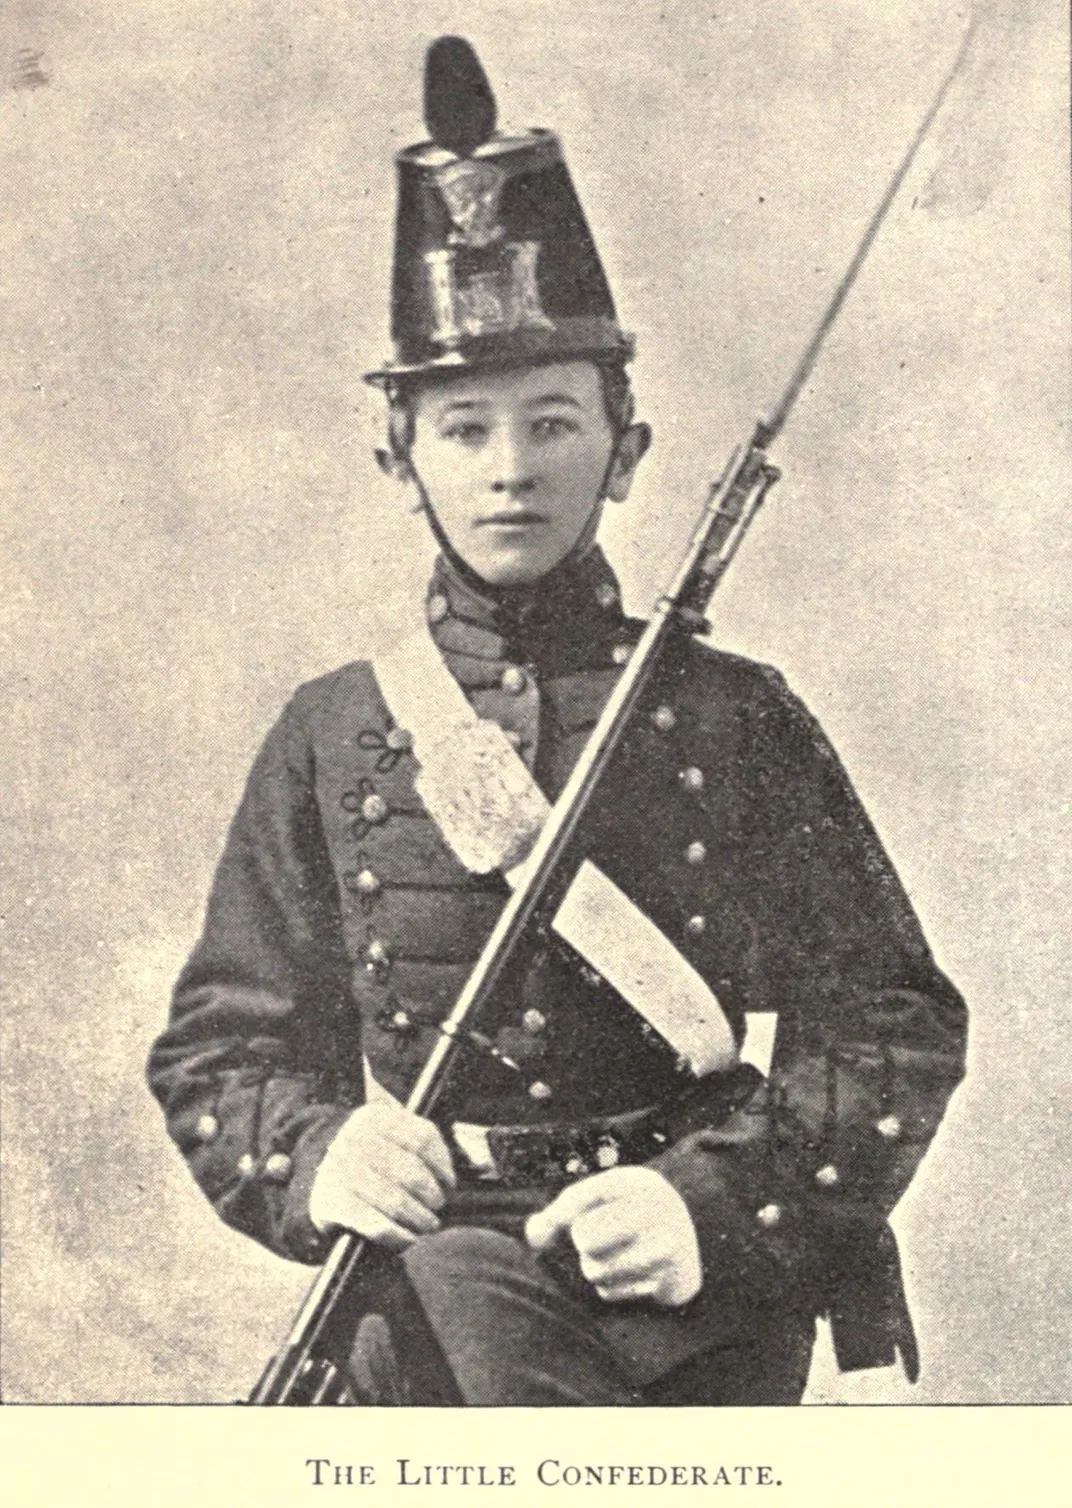 Sixteen-year-old James Dinkins of Mississippi in his cadet uniform